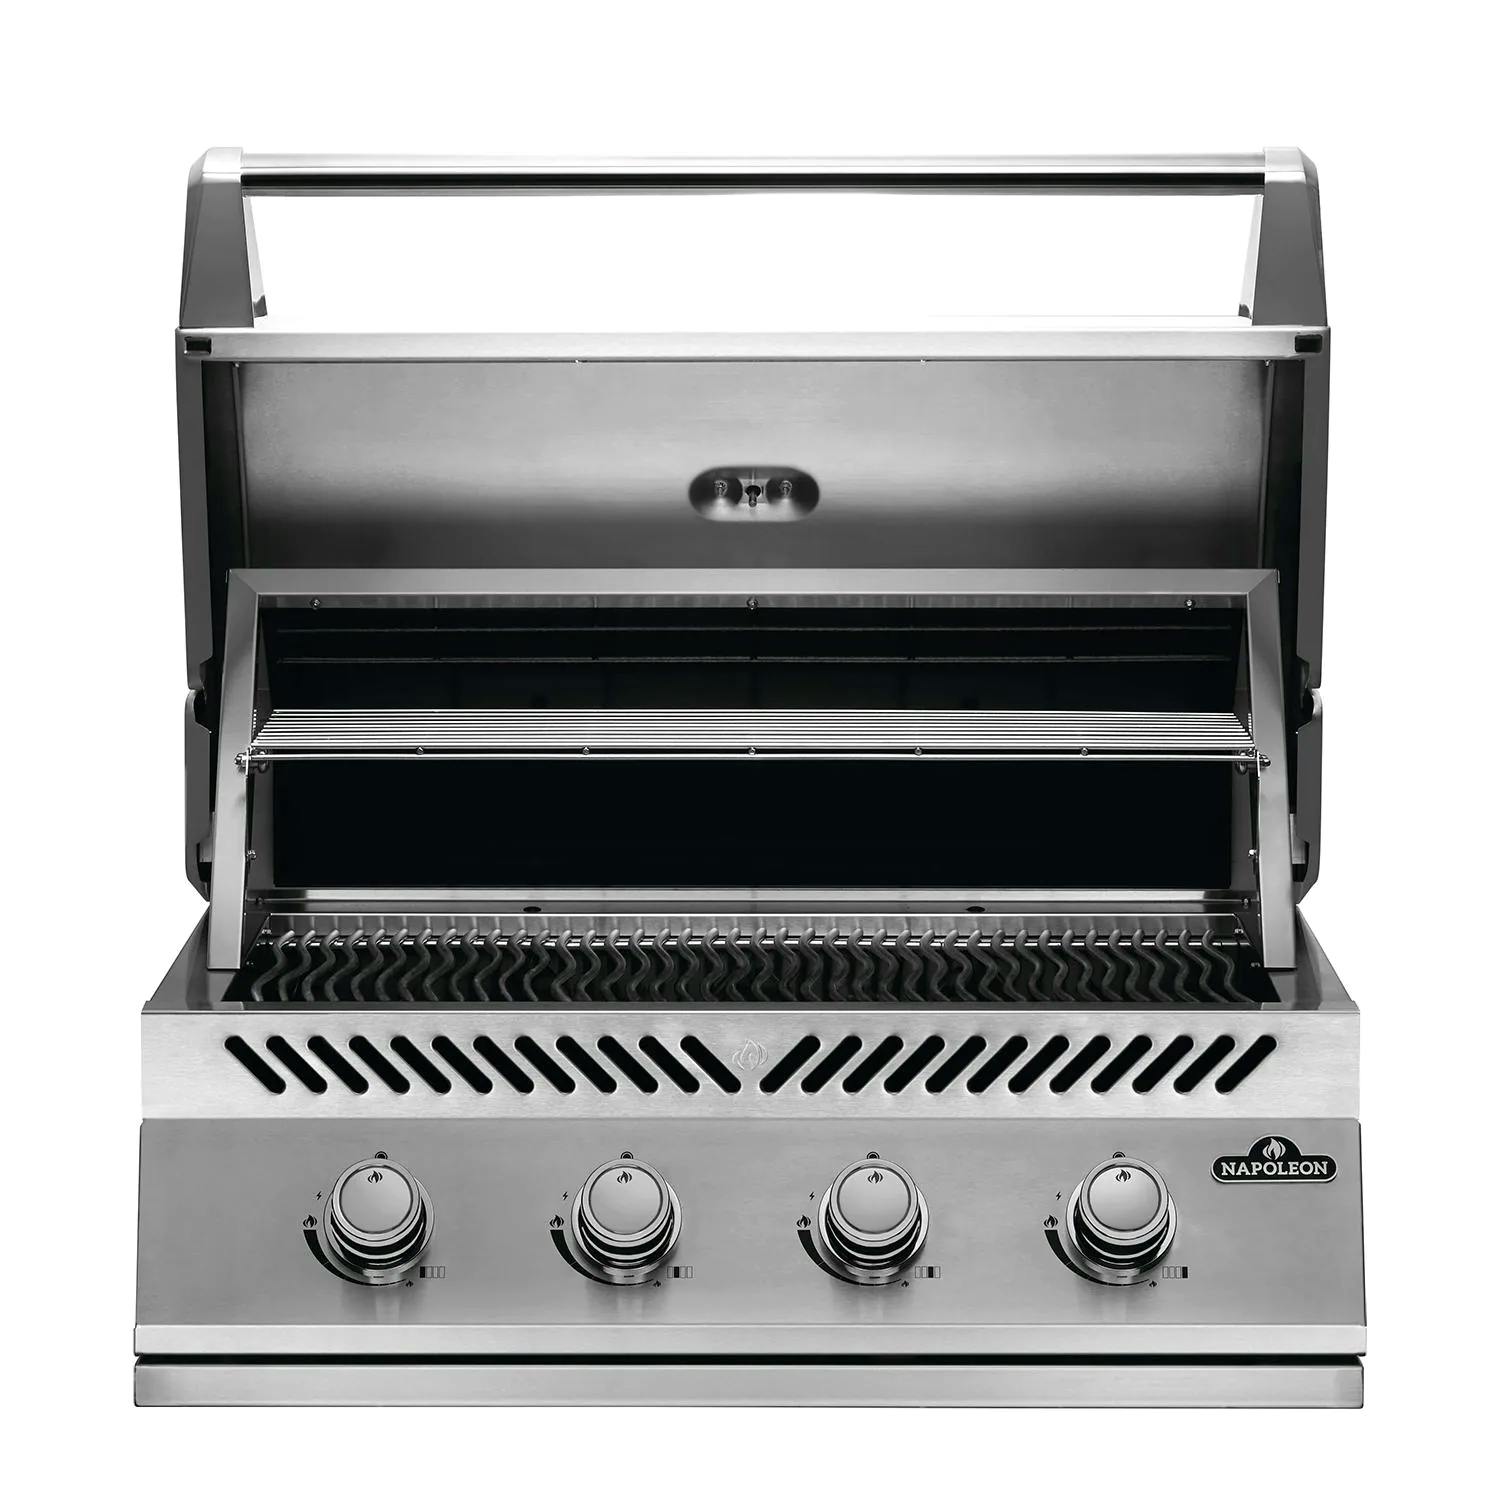 Napoleon 500 Series Built-in Gas Grill